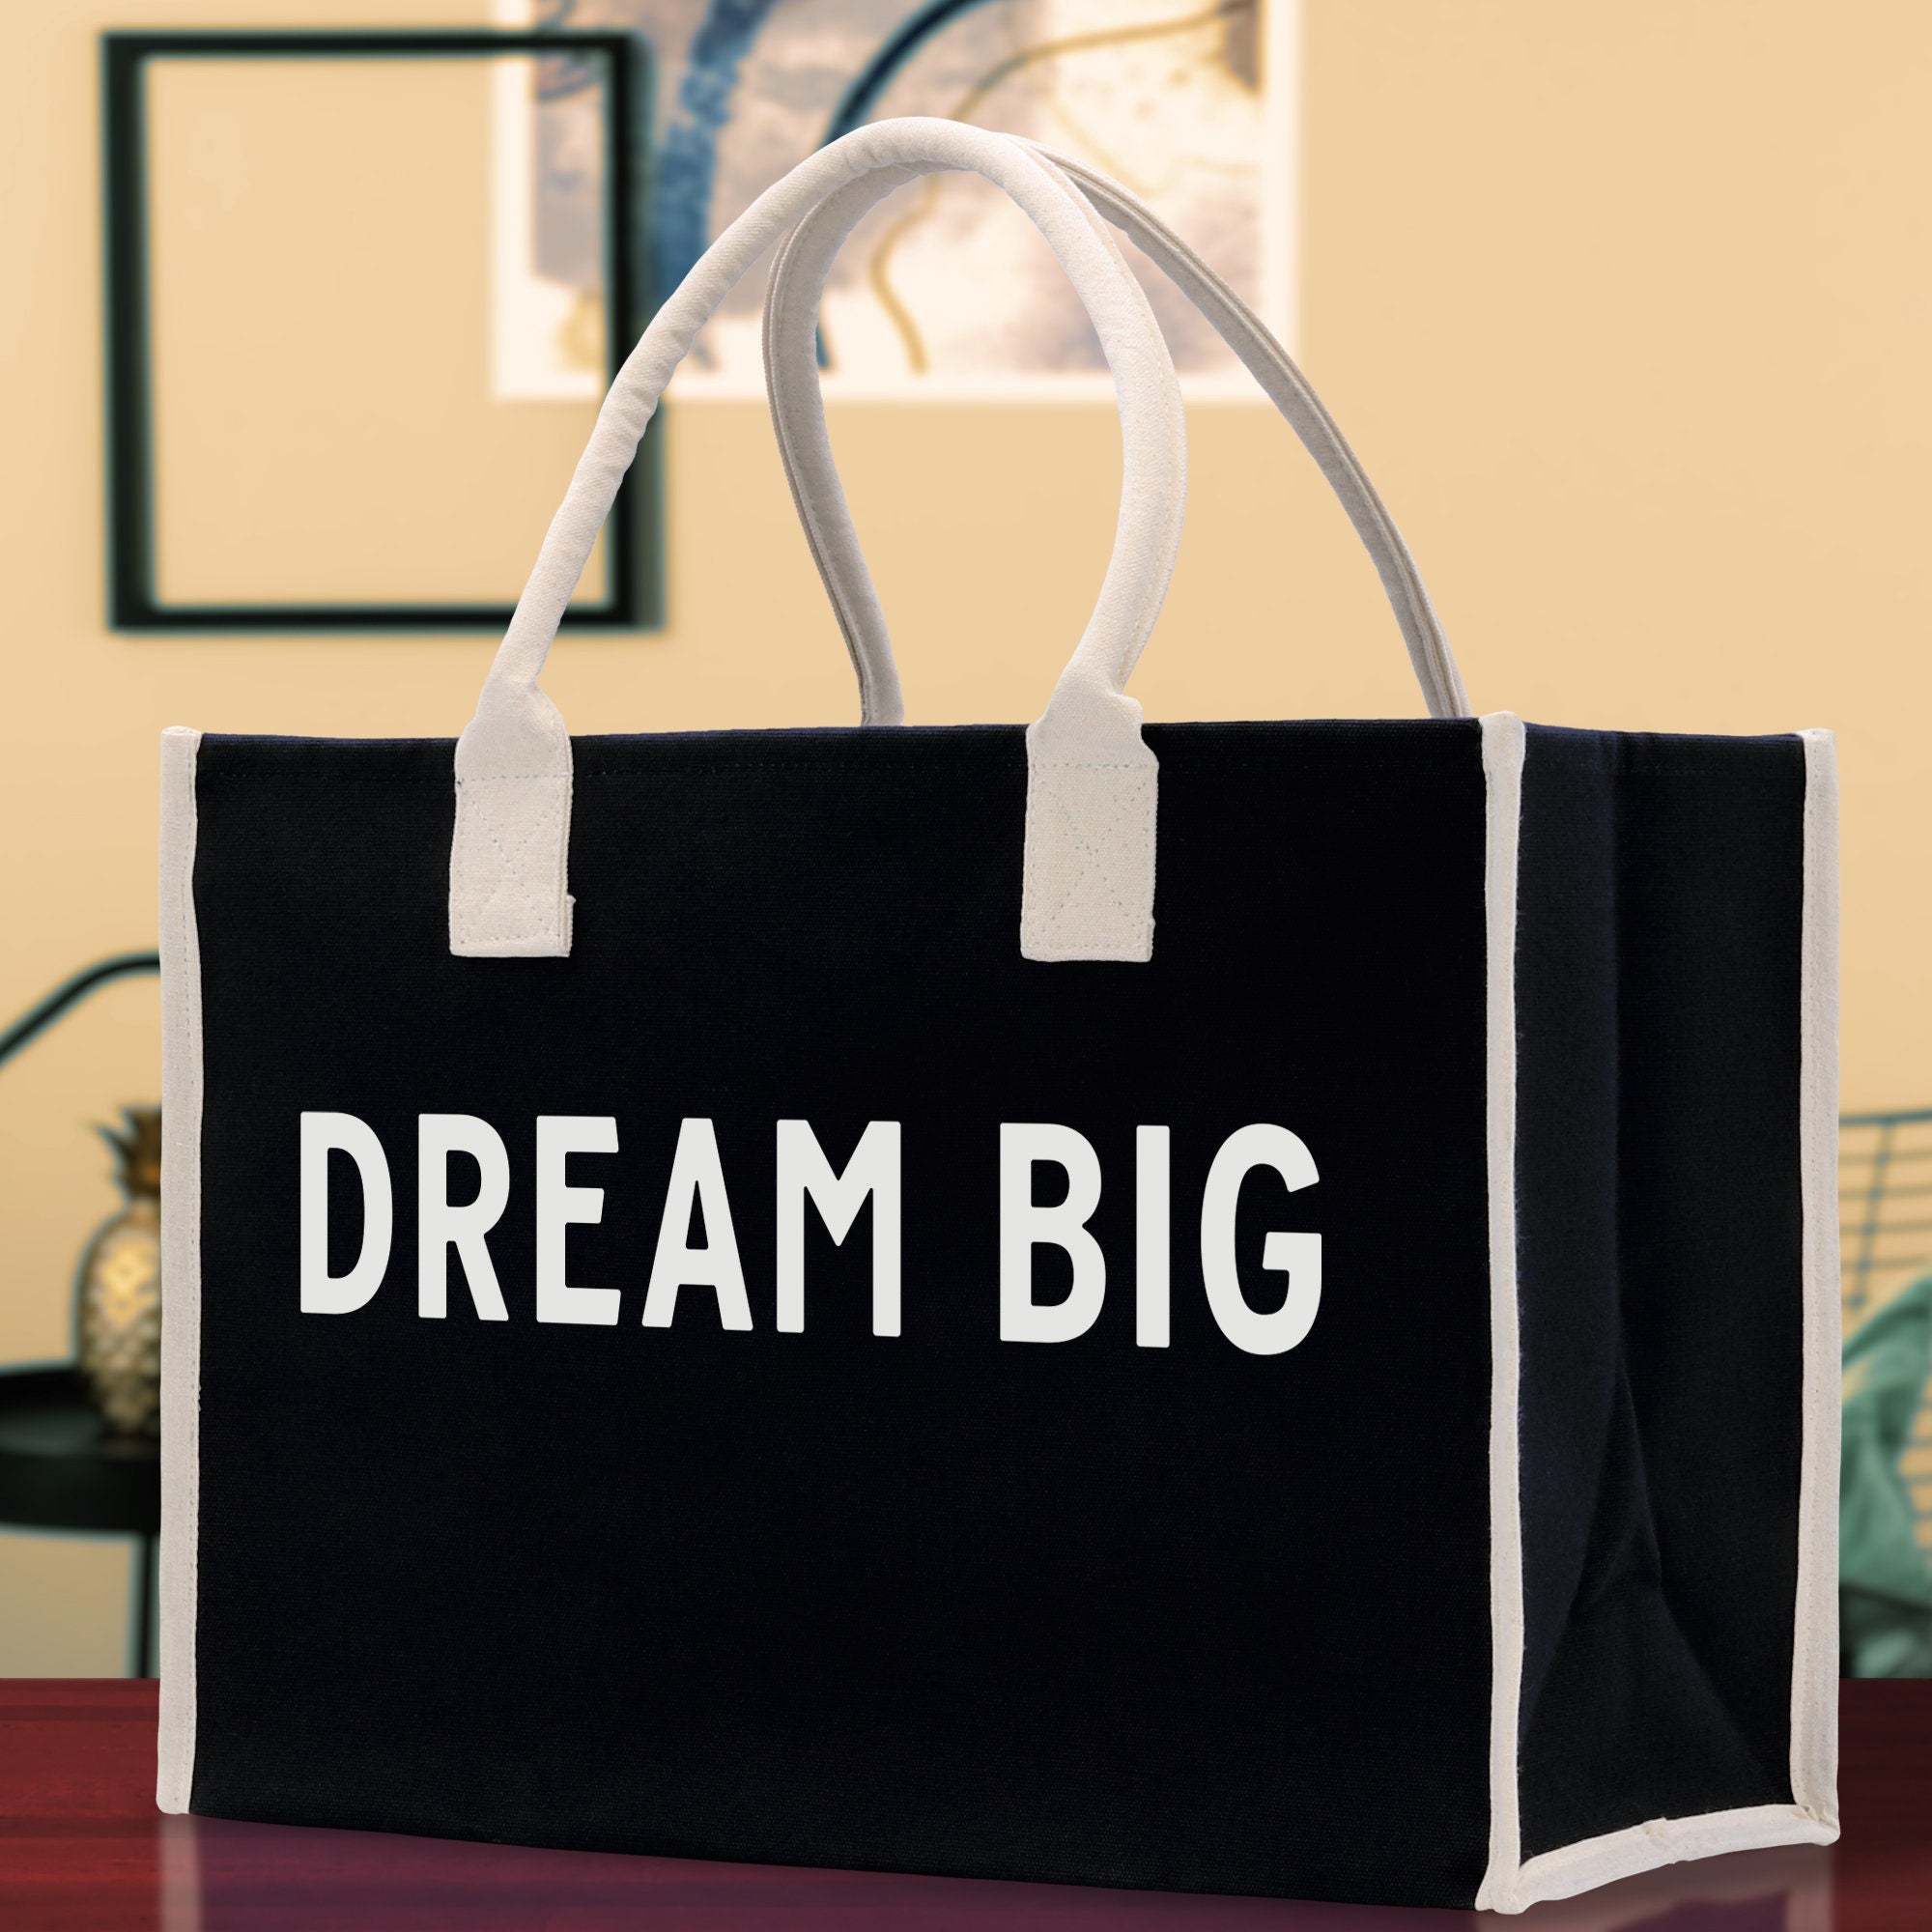 Dream Big Cotton Canvas Chic Beach Tote Bag Multipurpose Tote Weekender Tote Gift for Her Outdoor Tote Vacation Tote Large Beach Bag